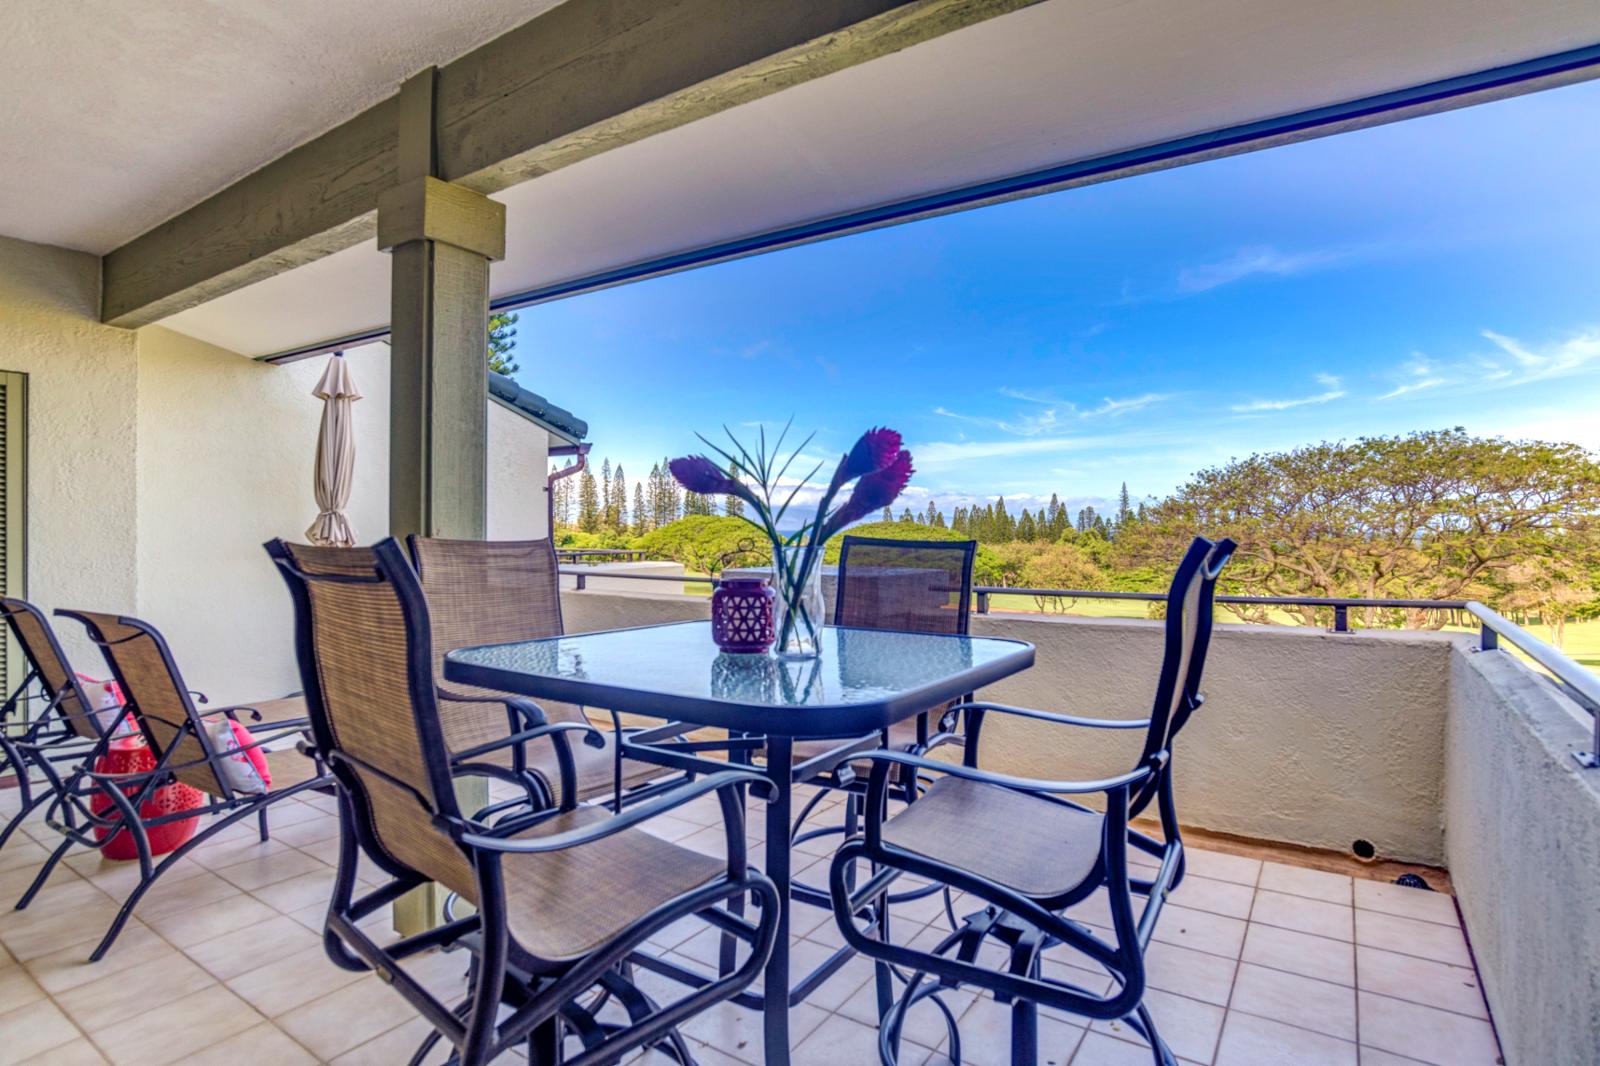 Welcome to Kapalua Golf Villa 16T4 located in the world famous Kapalua Resort!